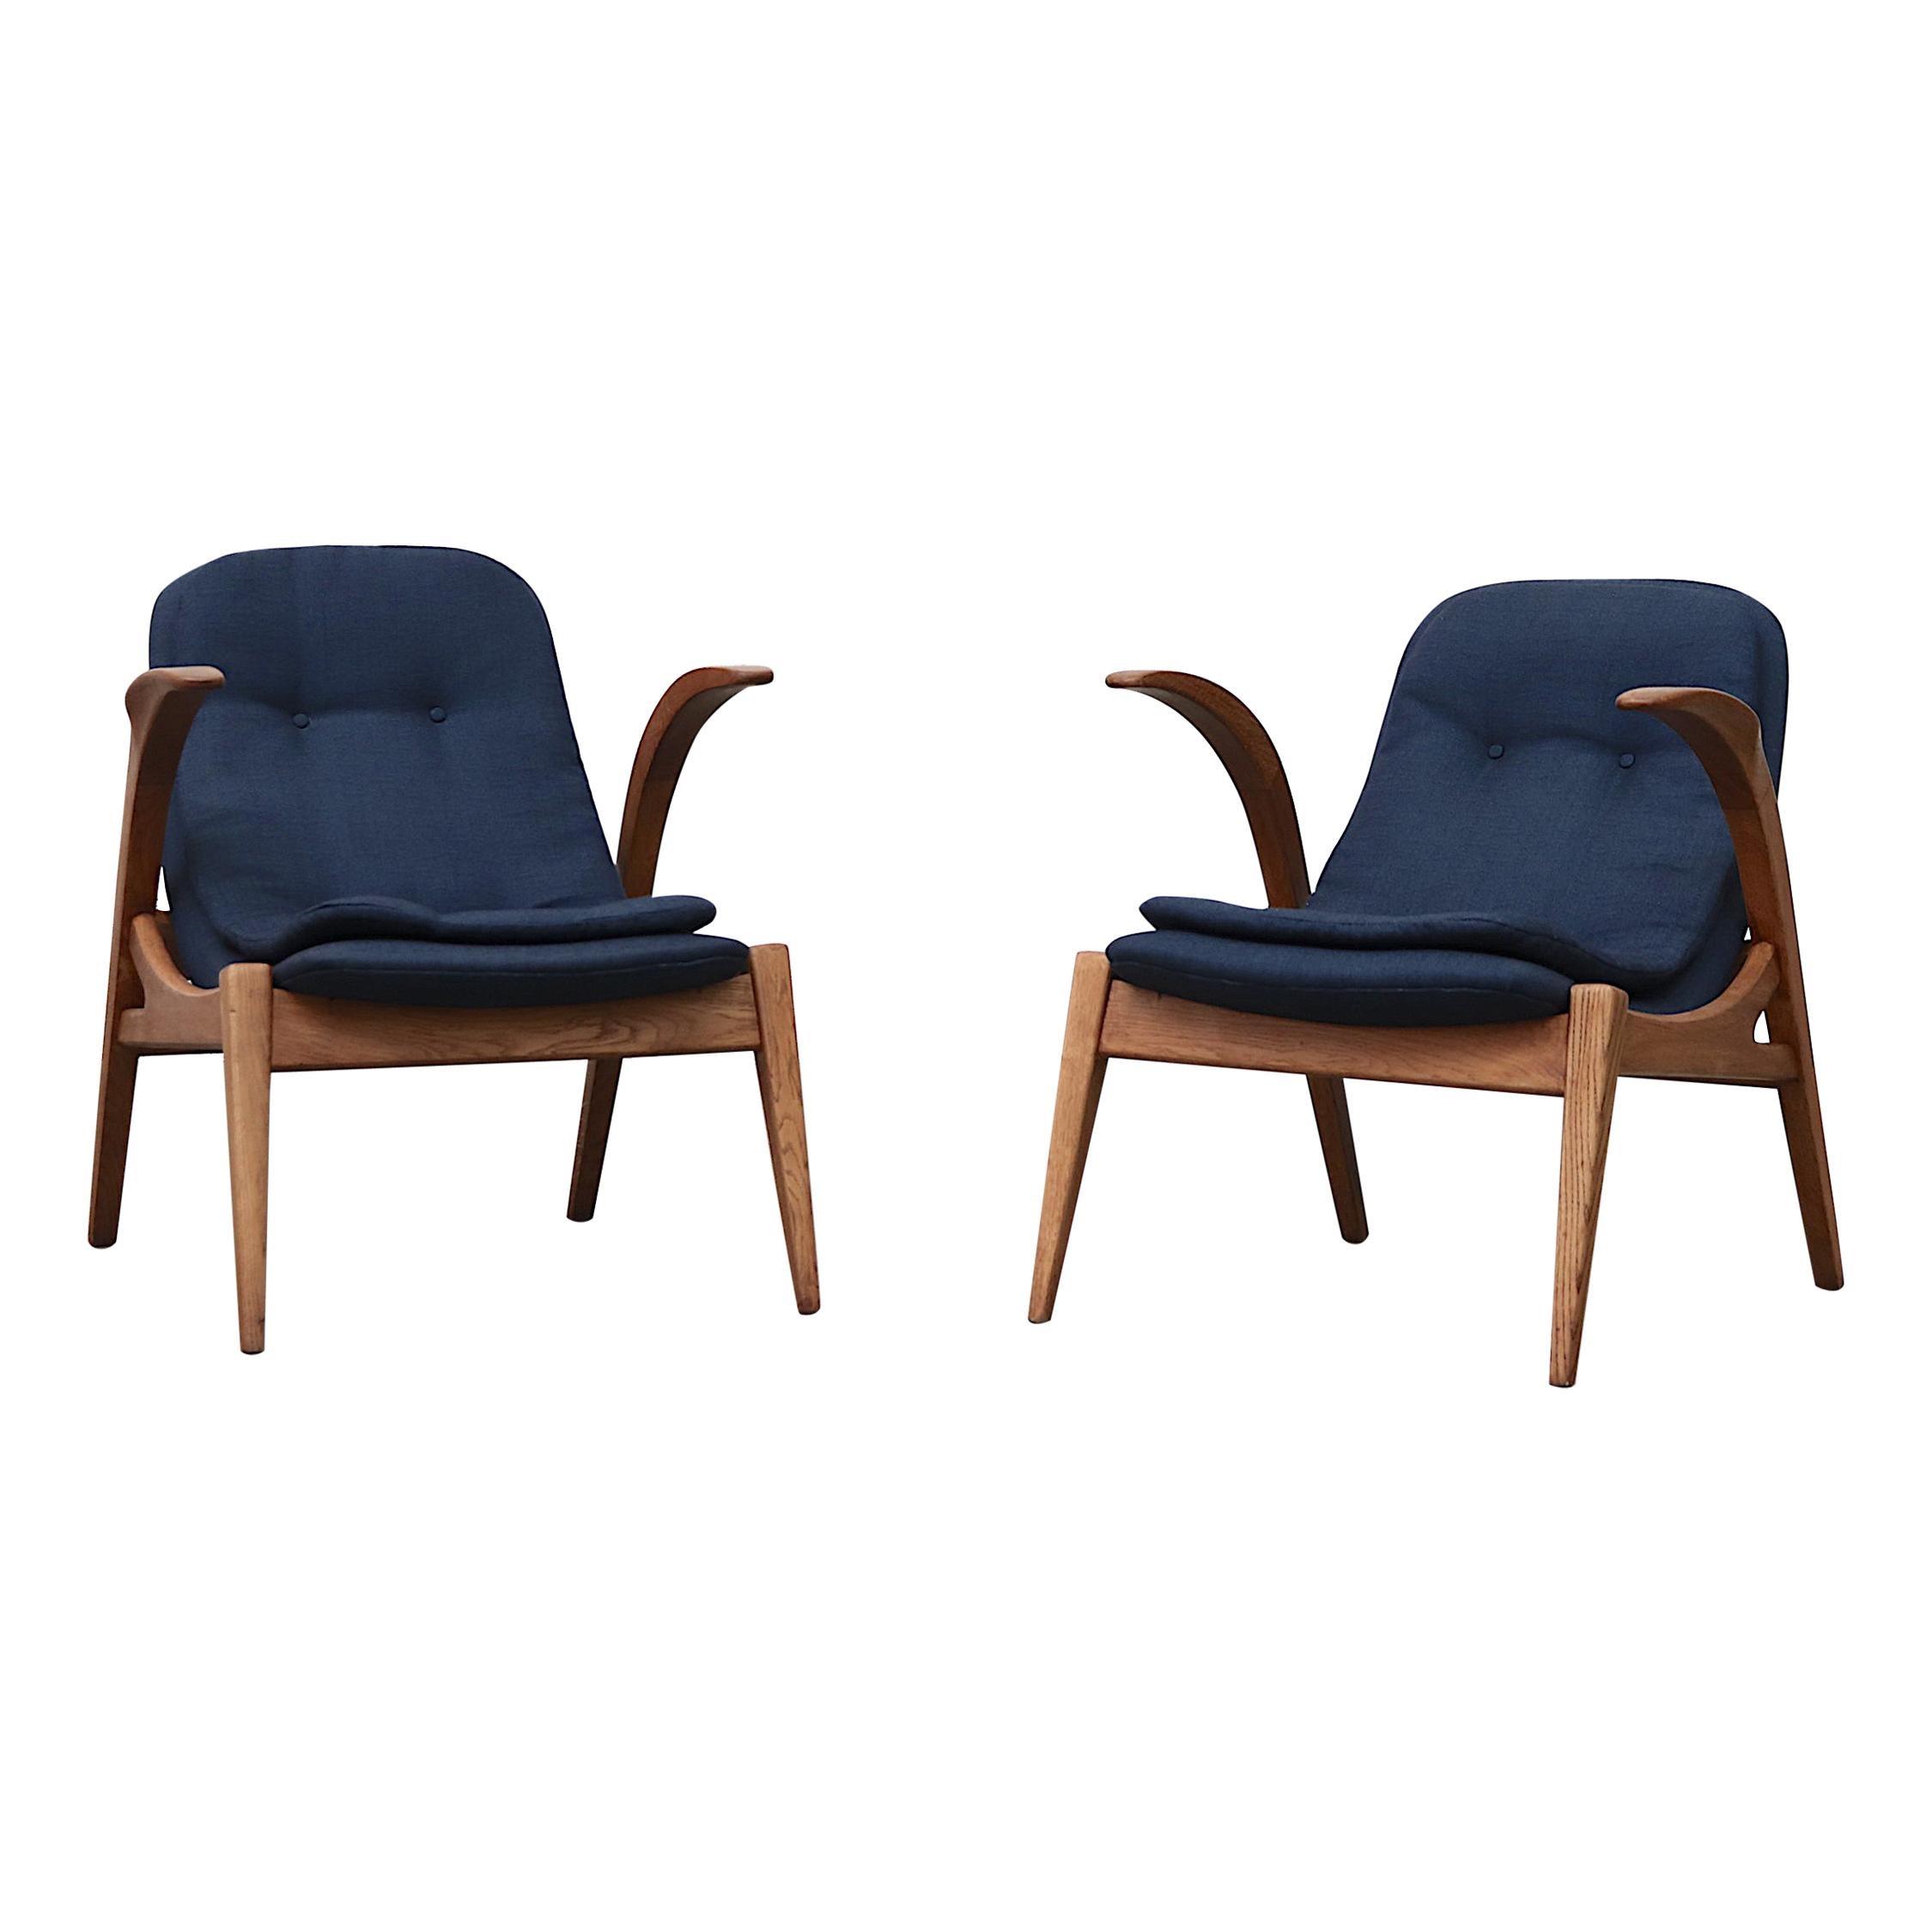 Small Midcentury Child Sized Penguin Lounge Chairs At 1stdibs